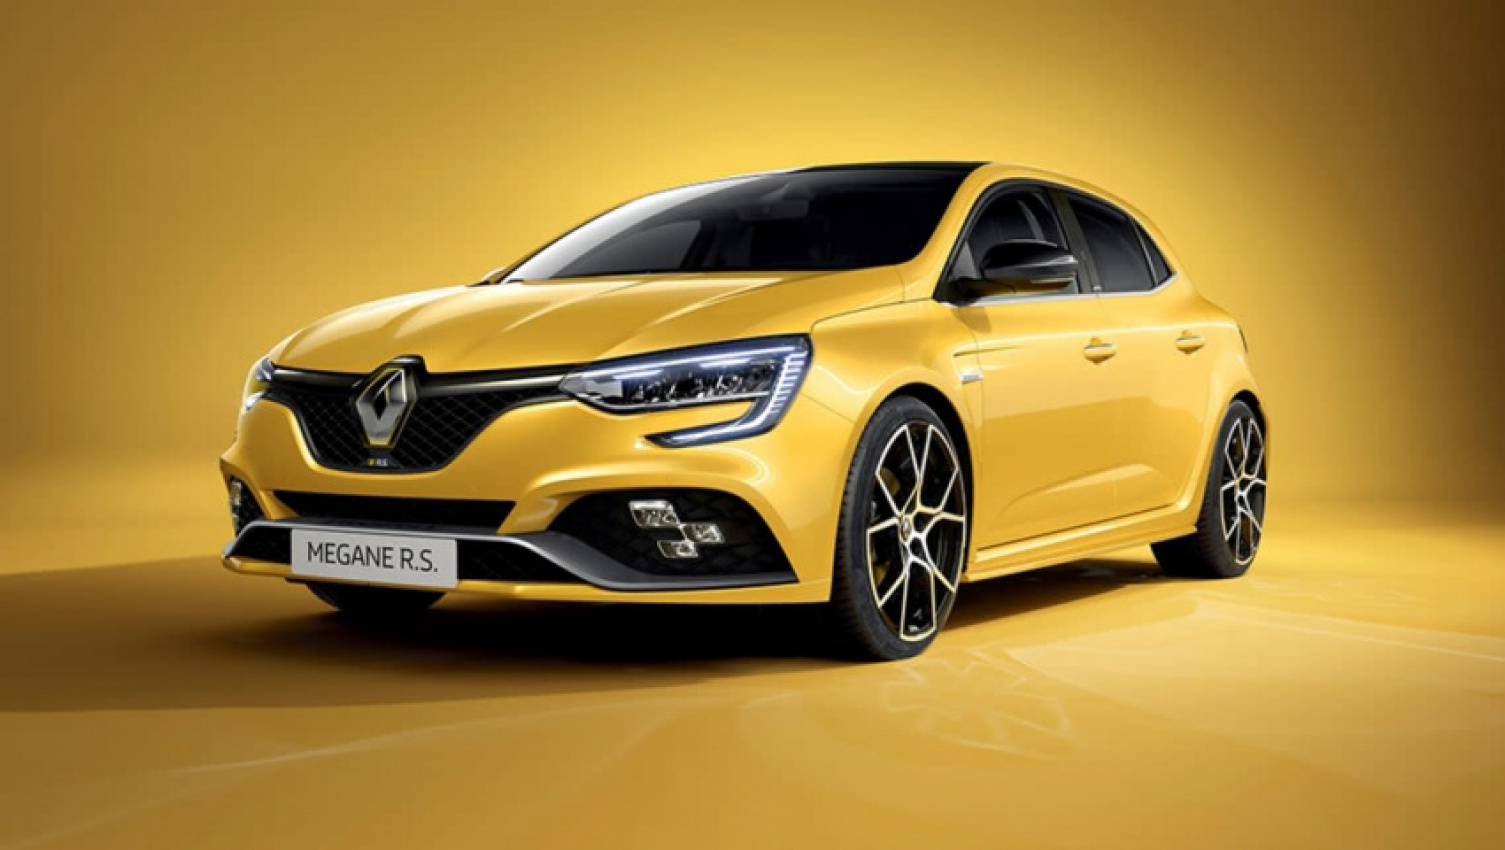 autos, cars, renault, commercial, electric cars, hatchback, industry news, renault arkana, renault arkana 2022, renault captur, renault captur 2022, renault commercial range, renault hatchback range, renault kangoo, renault kangoo 2022, renault koleos, renault koleos 2022, renault master, renault master 2022, renault megane, renault megane 2022, renault news, renault suv range, renault trafic, renault trafic 2022, showroom news, renault price rises alert! 2022 renault megane, captur, arkana, koleos, trafic and master to be up to $6100 dearer from march amid industry challenges